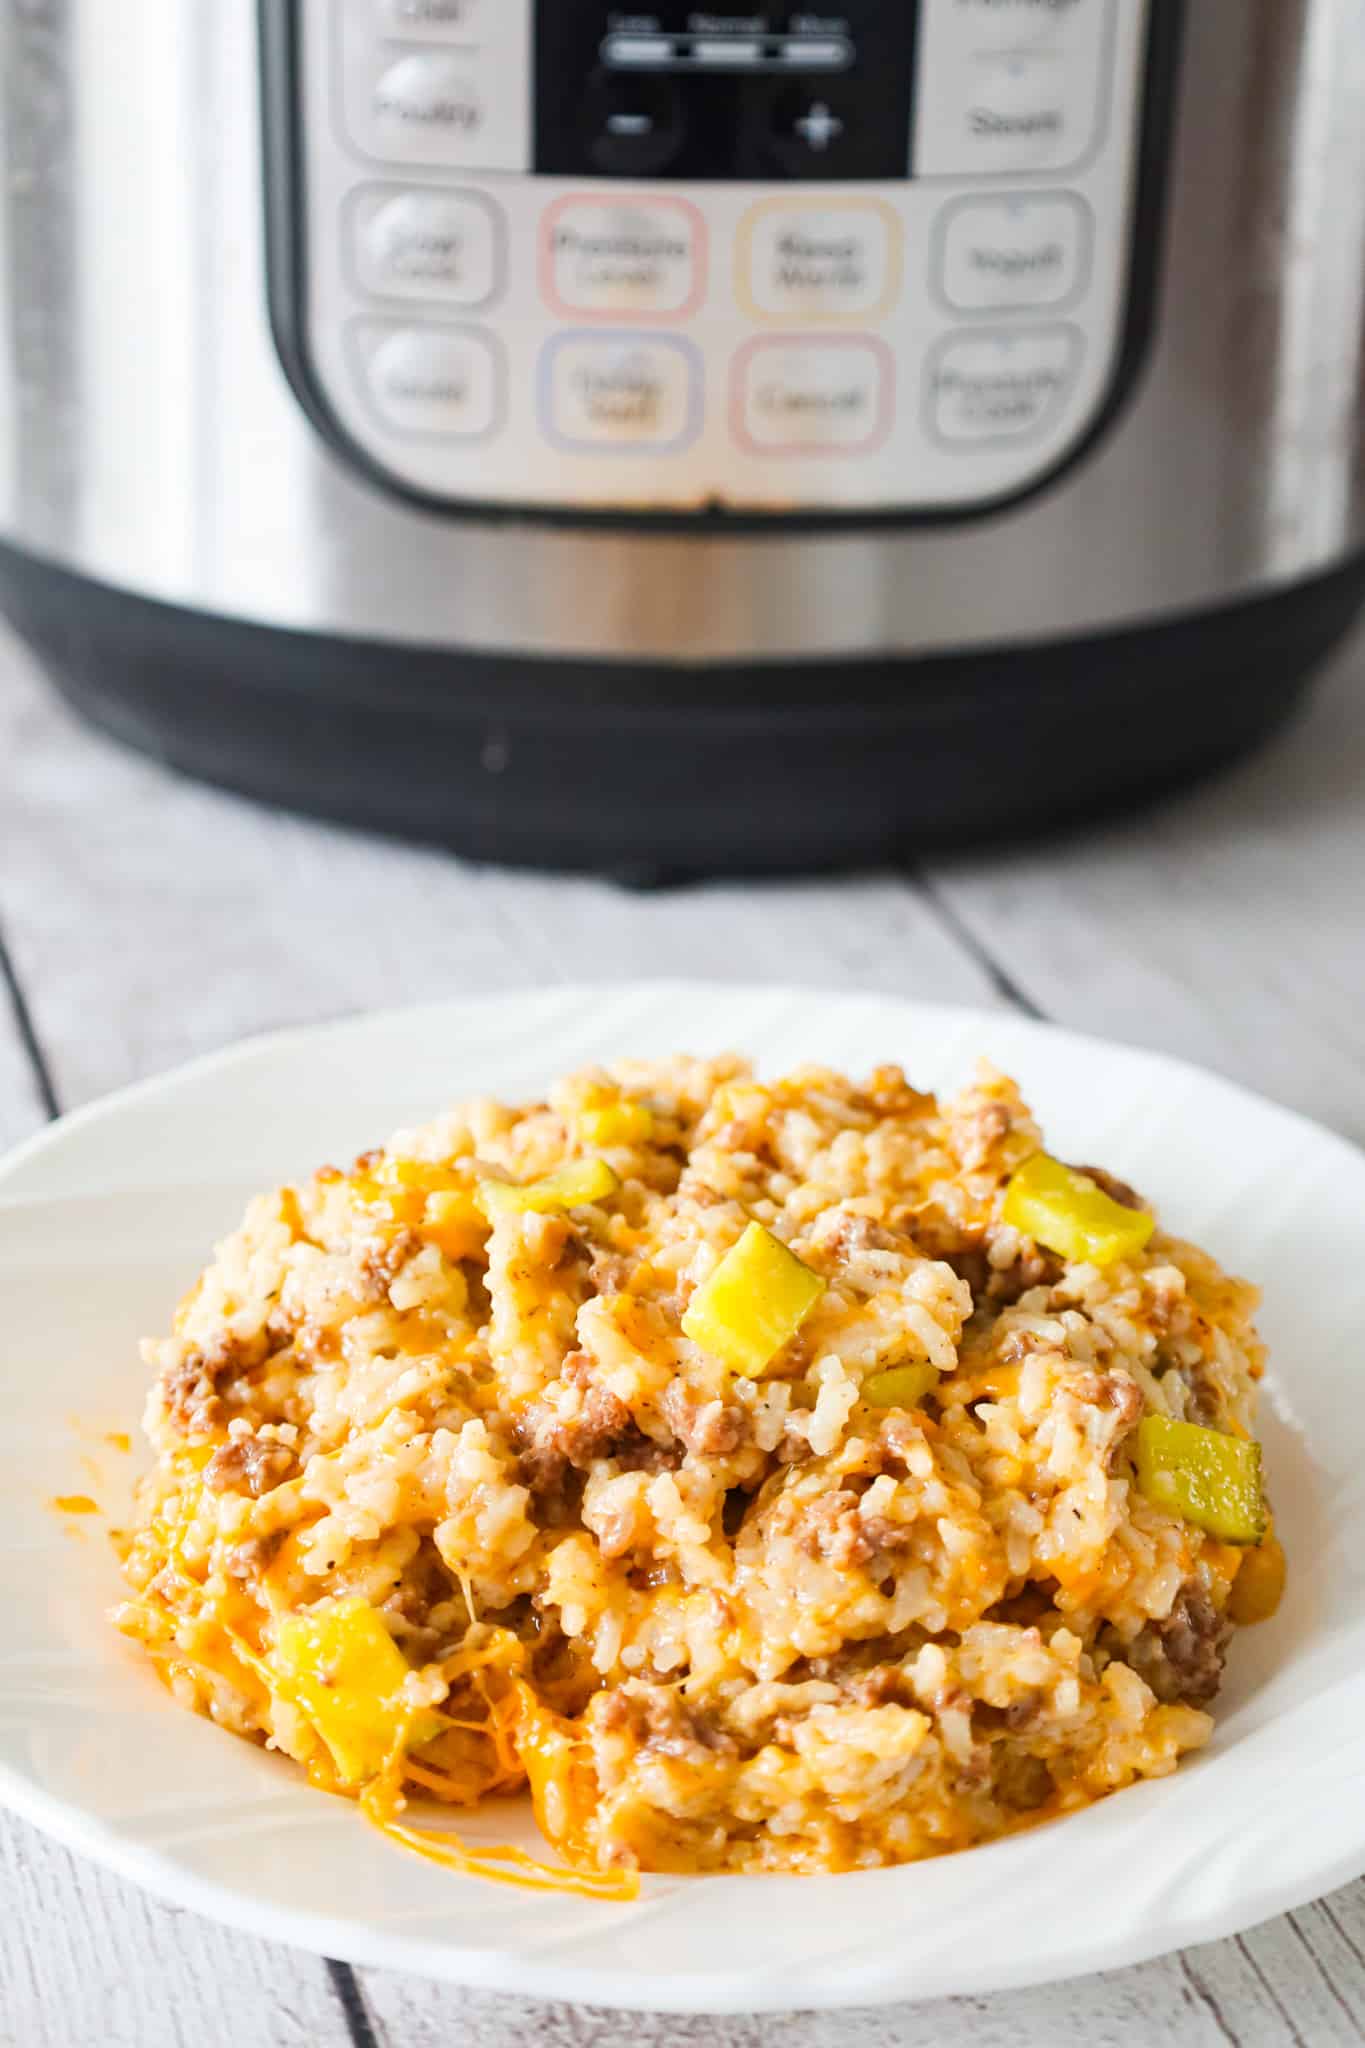 Instant Pot Big Mac Ground Beef and Rice is an easy pressure cooker dinner recipe made with long grain white rice and loaded with crumbled ground beef, diced dill pickles, mayo, Thousand Island dressing and shredded cheddar cheese.